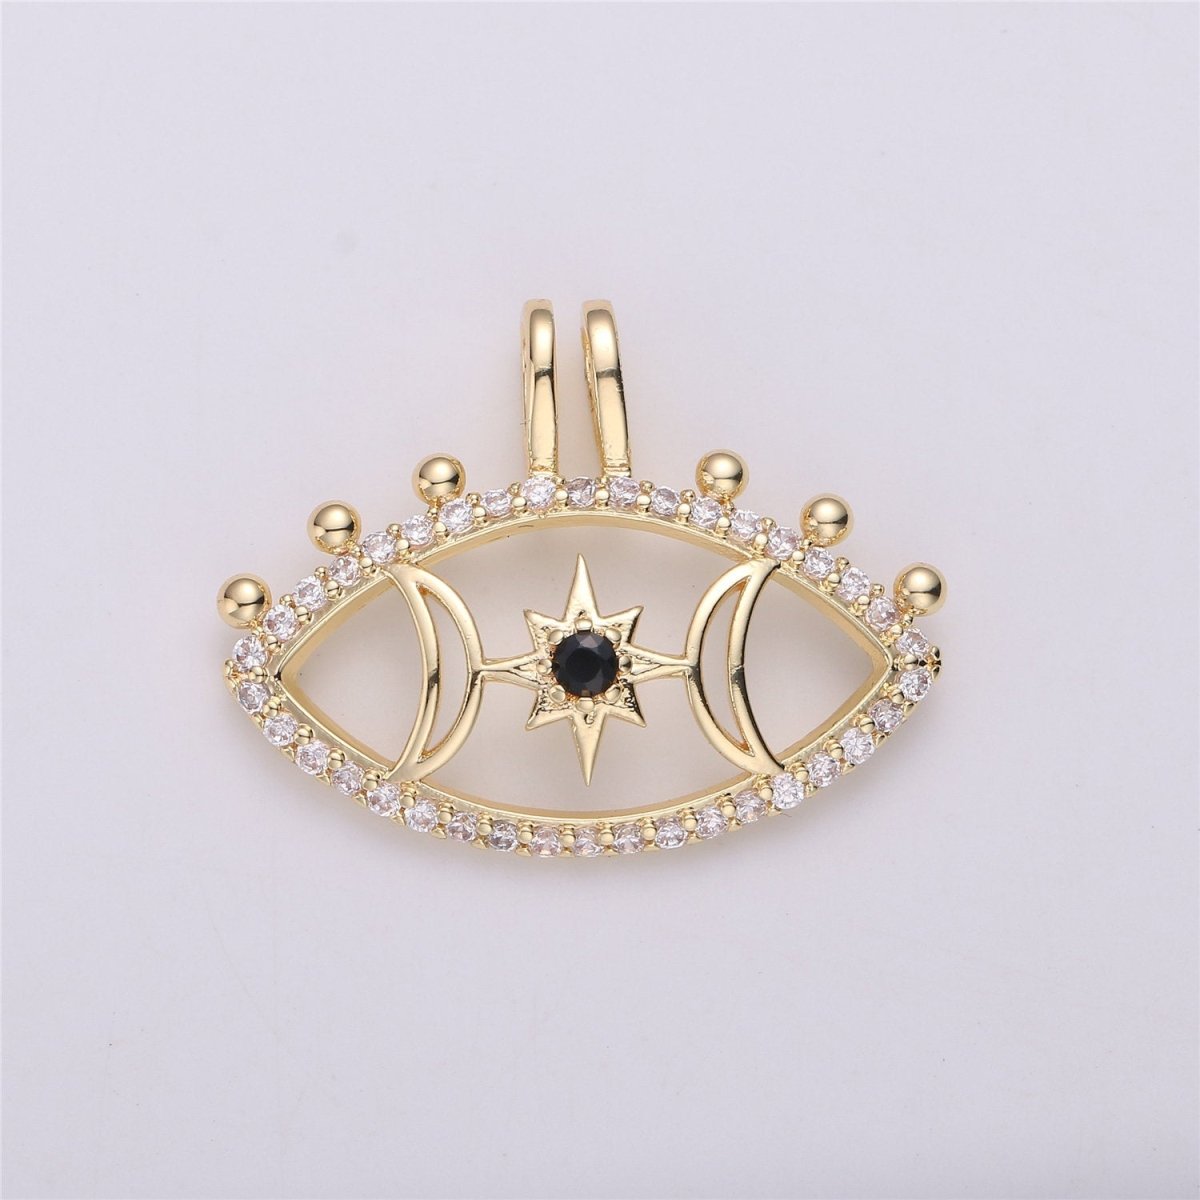 18k Gold filled Goddess Pendant • celestial charm • for necklace jewelry making supplyC-541 - DLUXCA